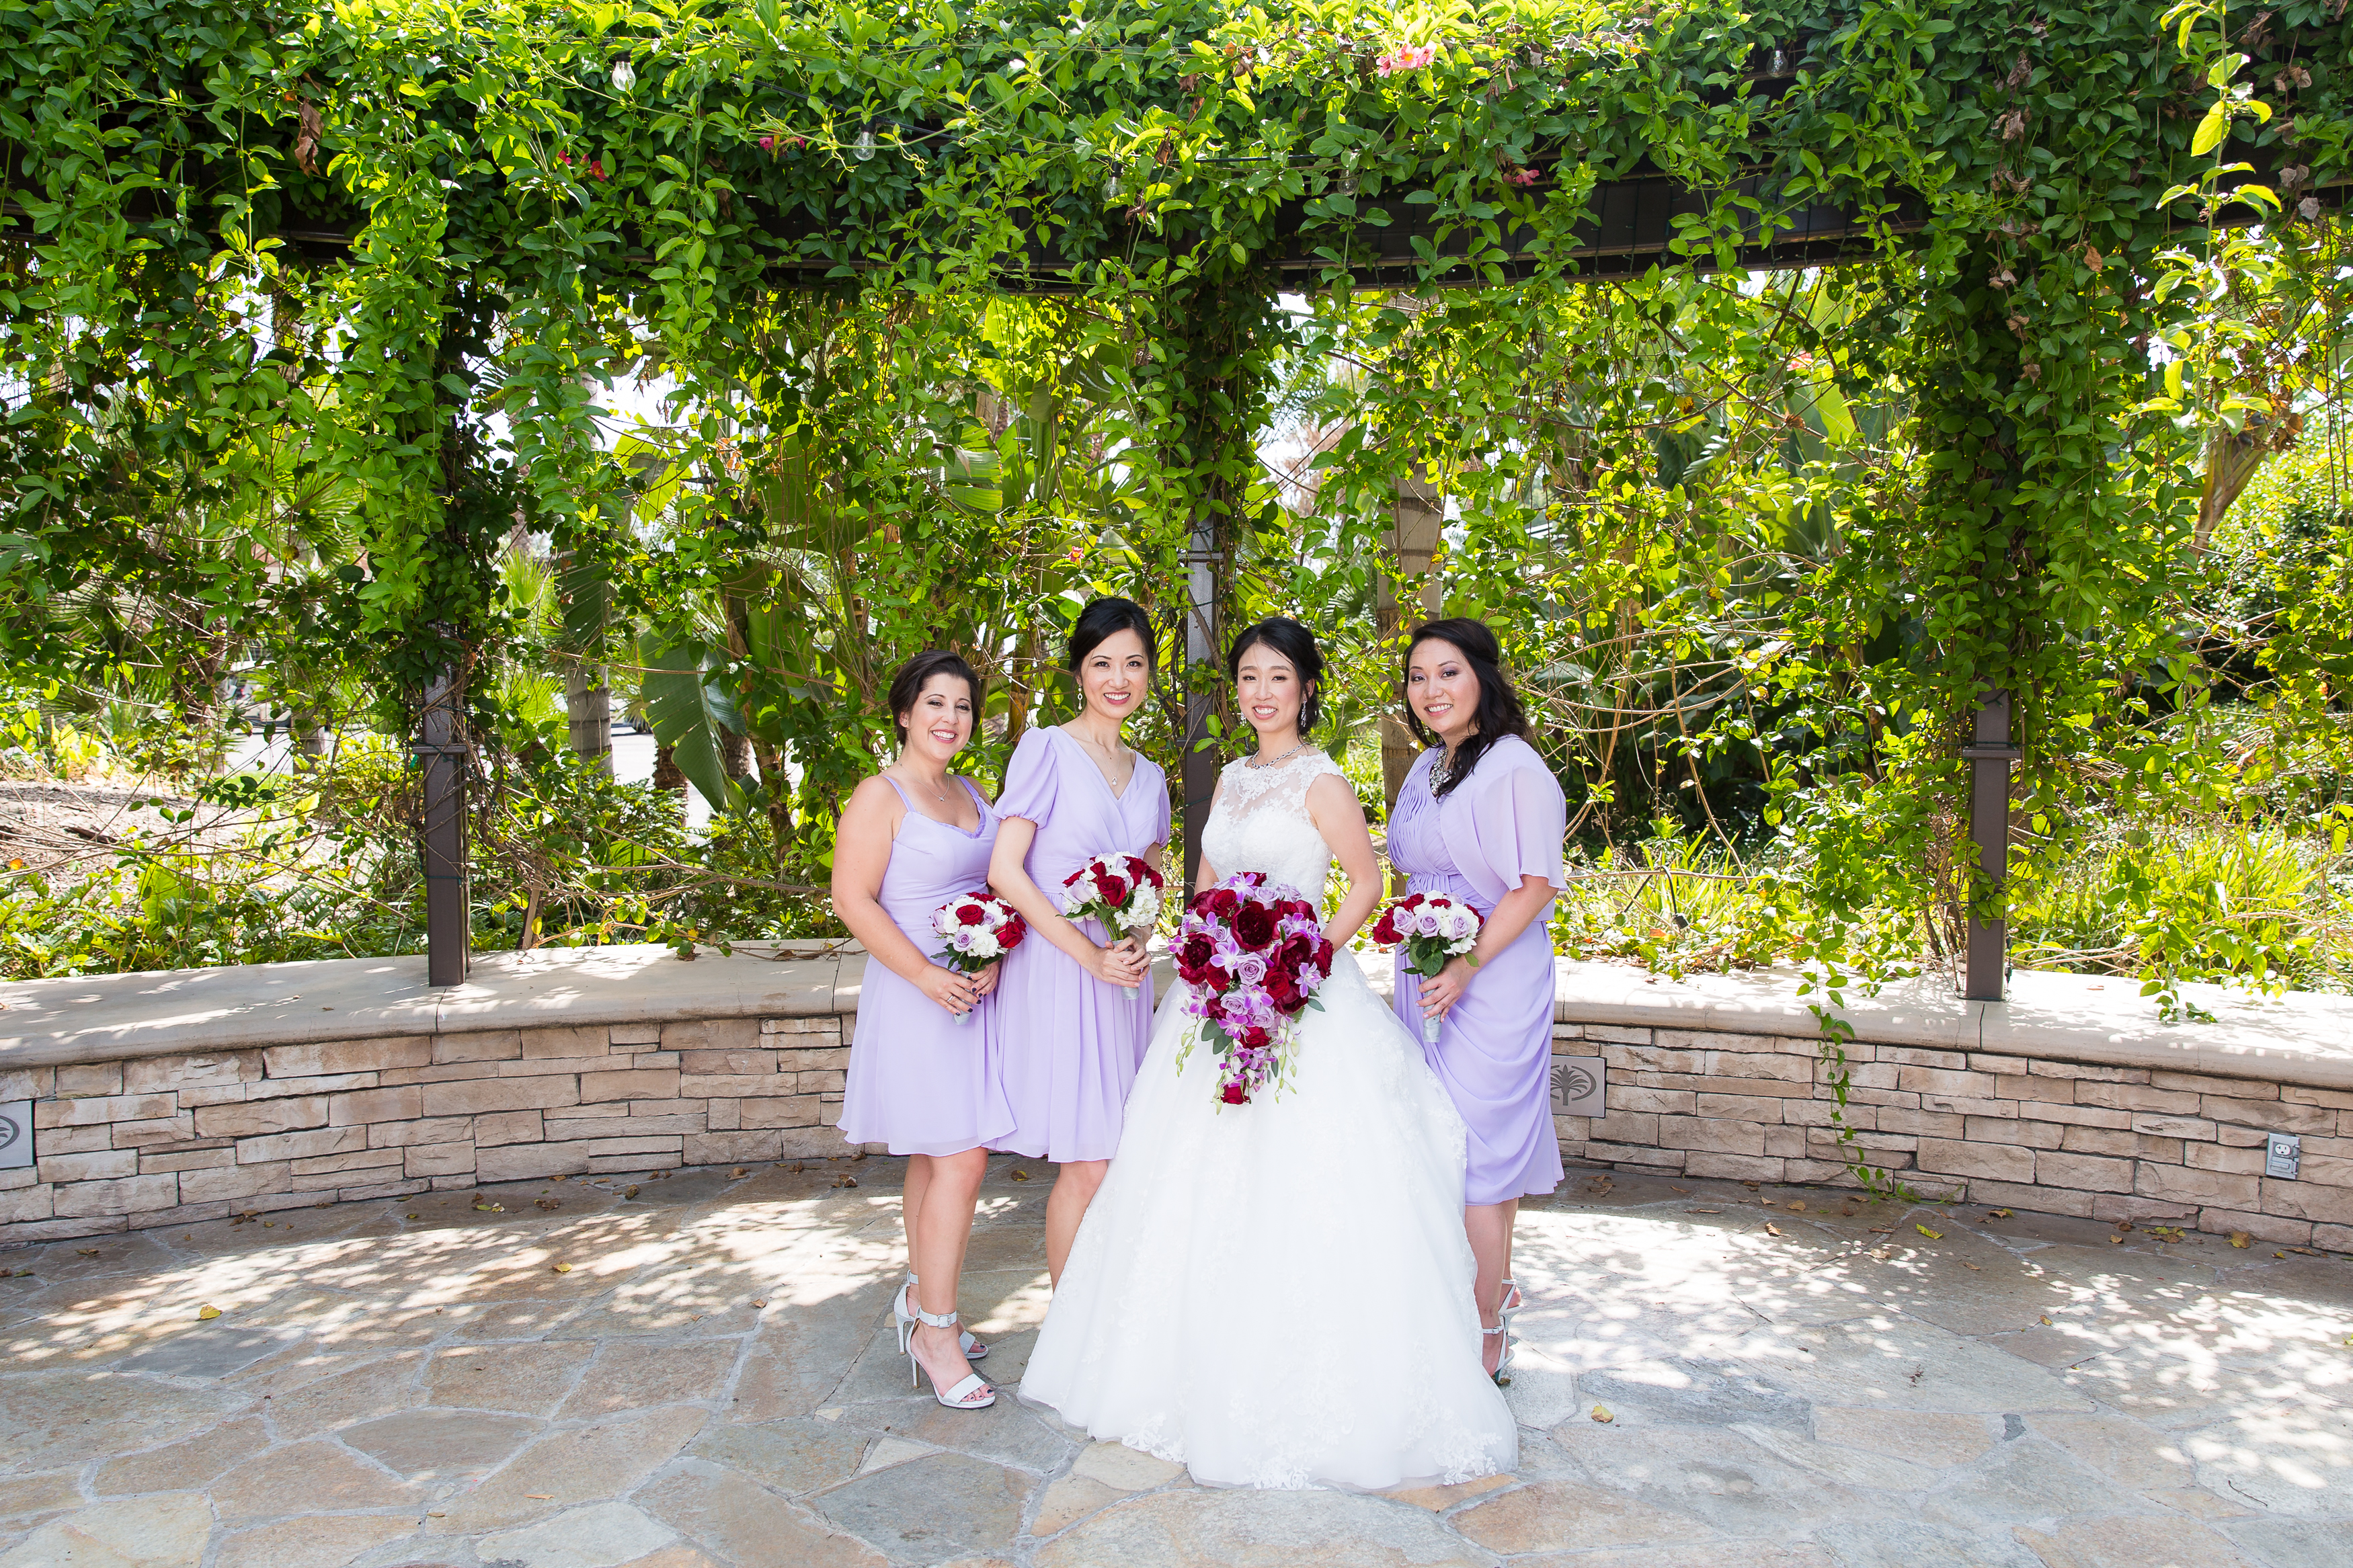 Bride smiling with bridesmaids in purple dresses